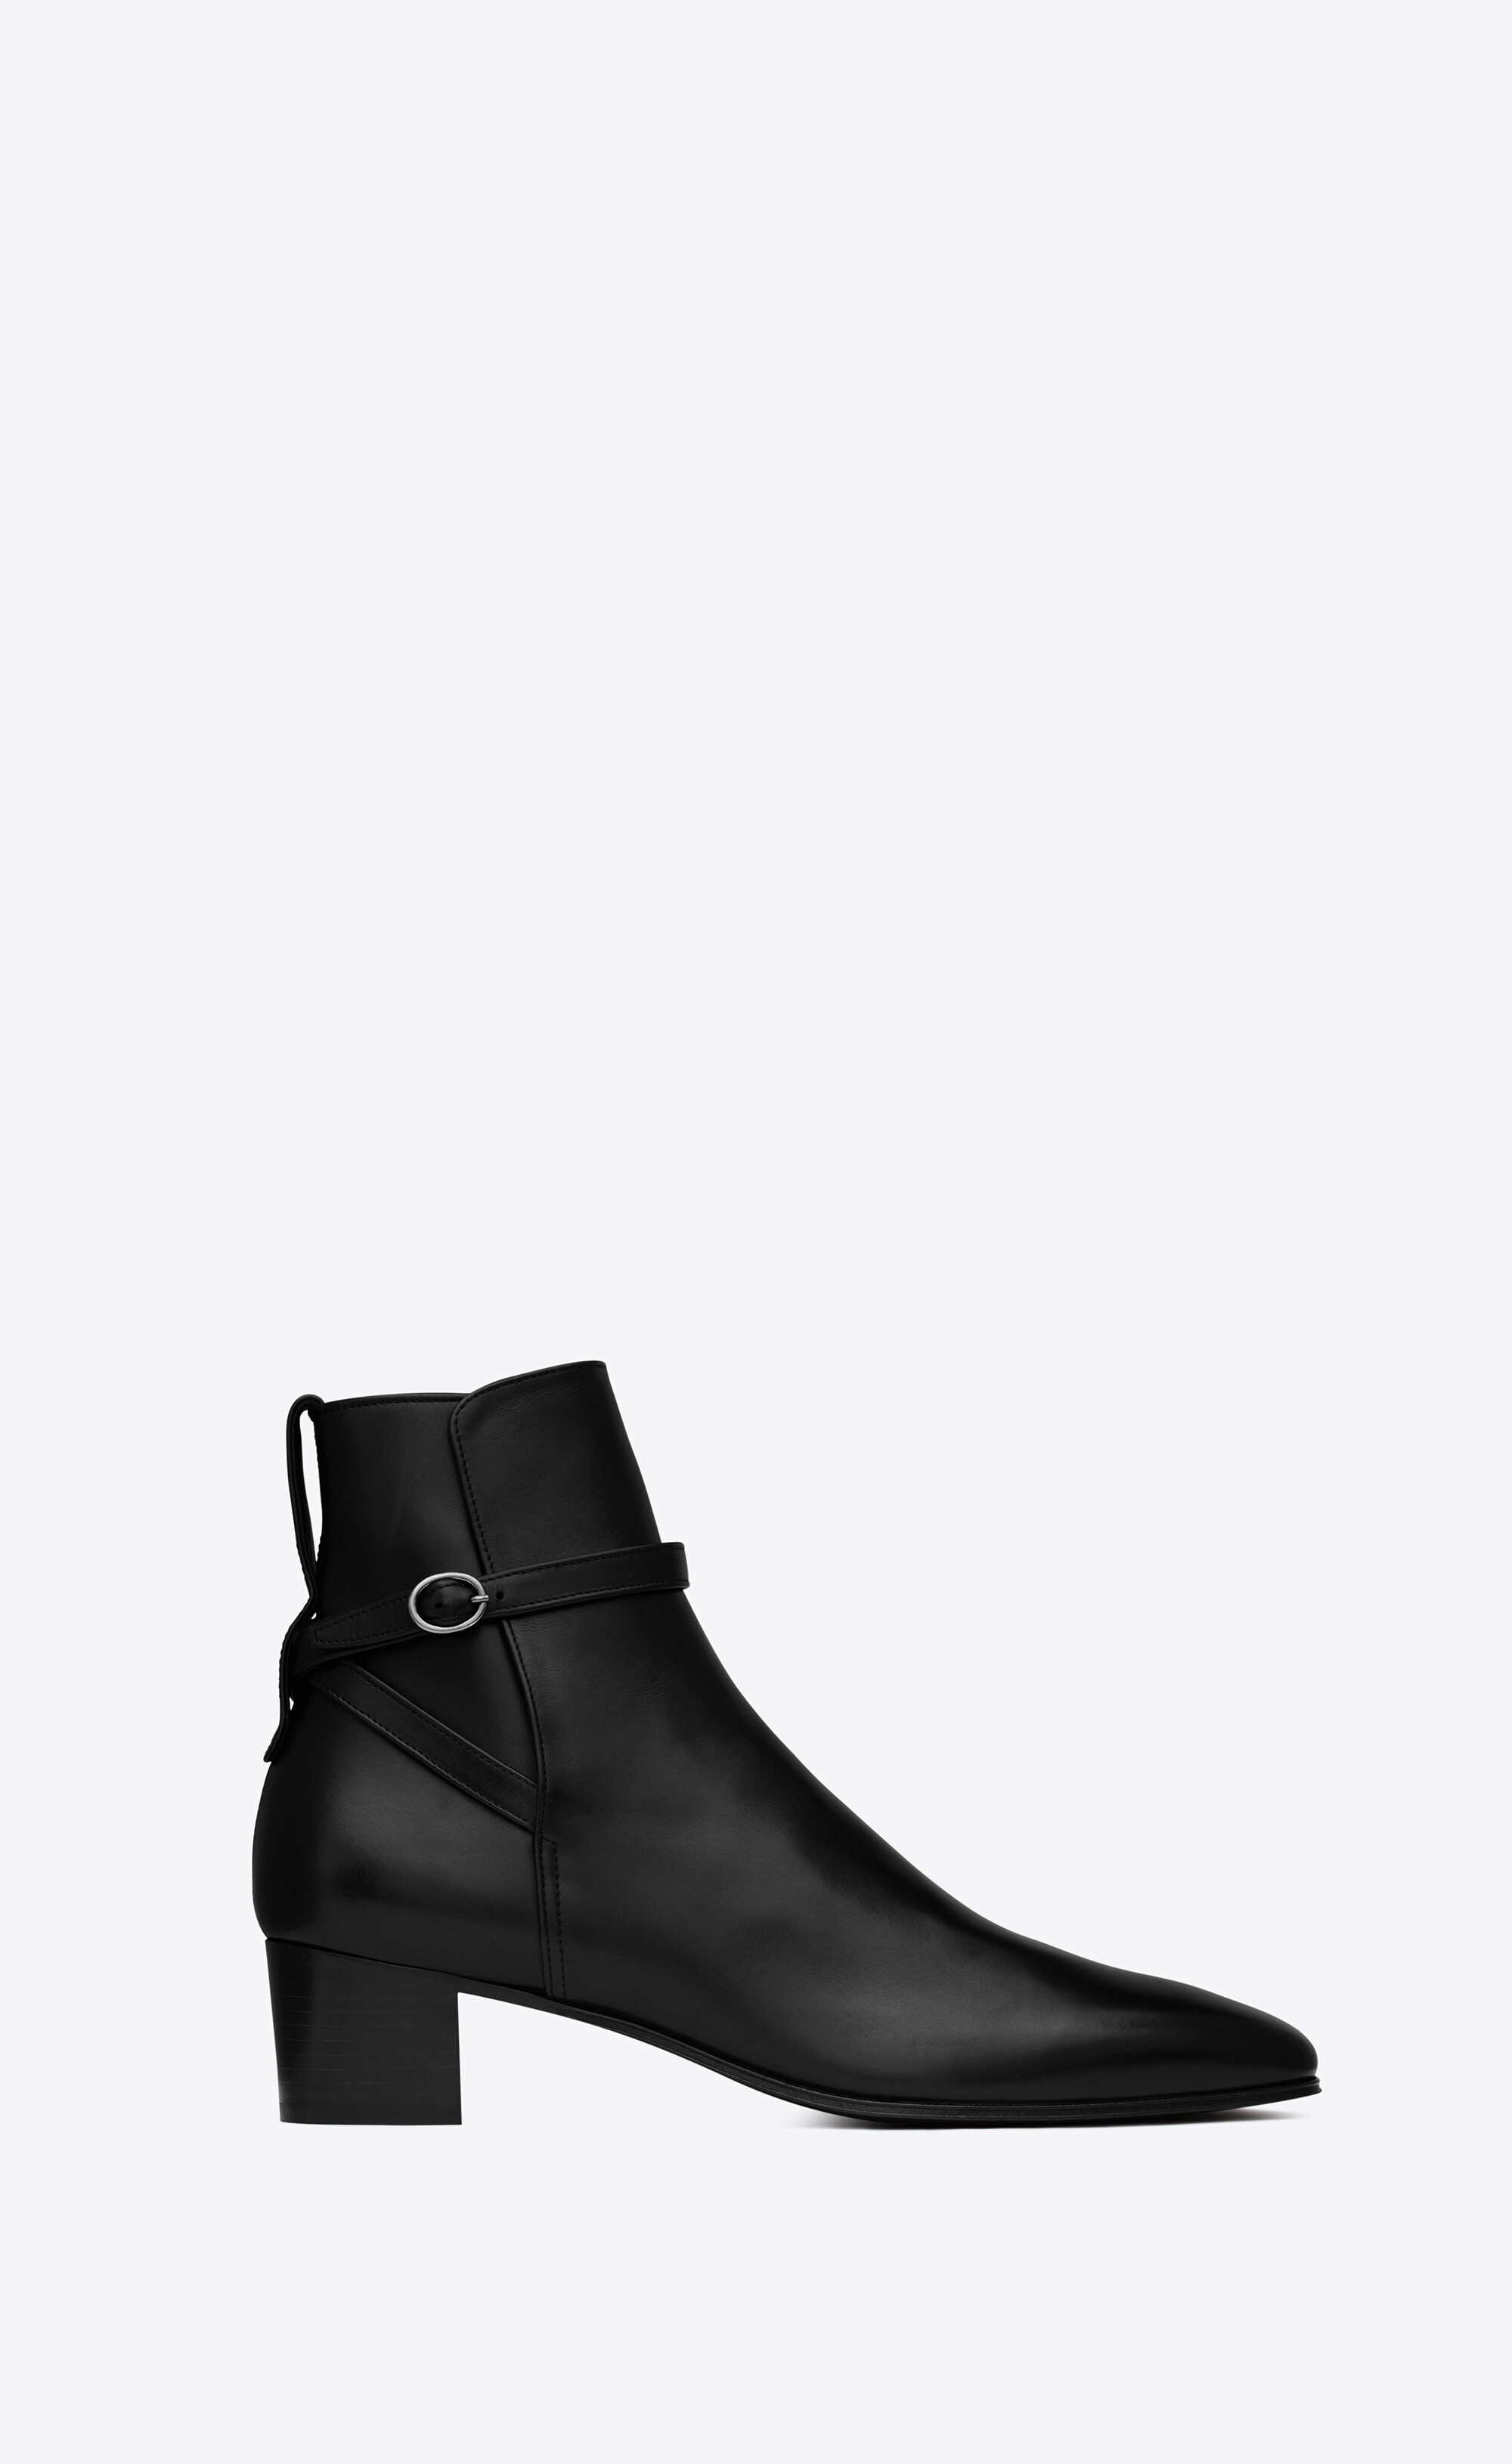 terry jodhpur boots in smooth leather - 1